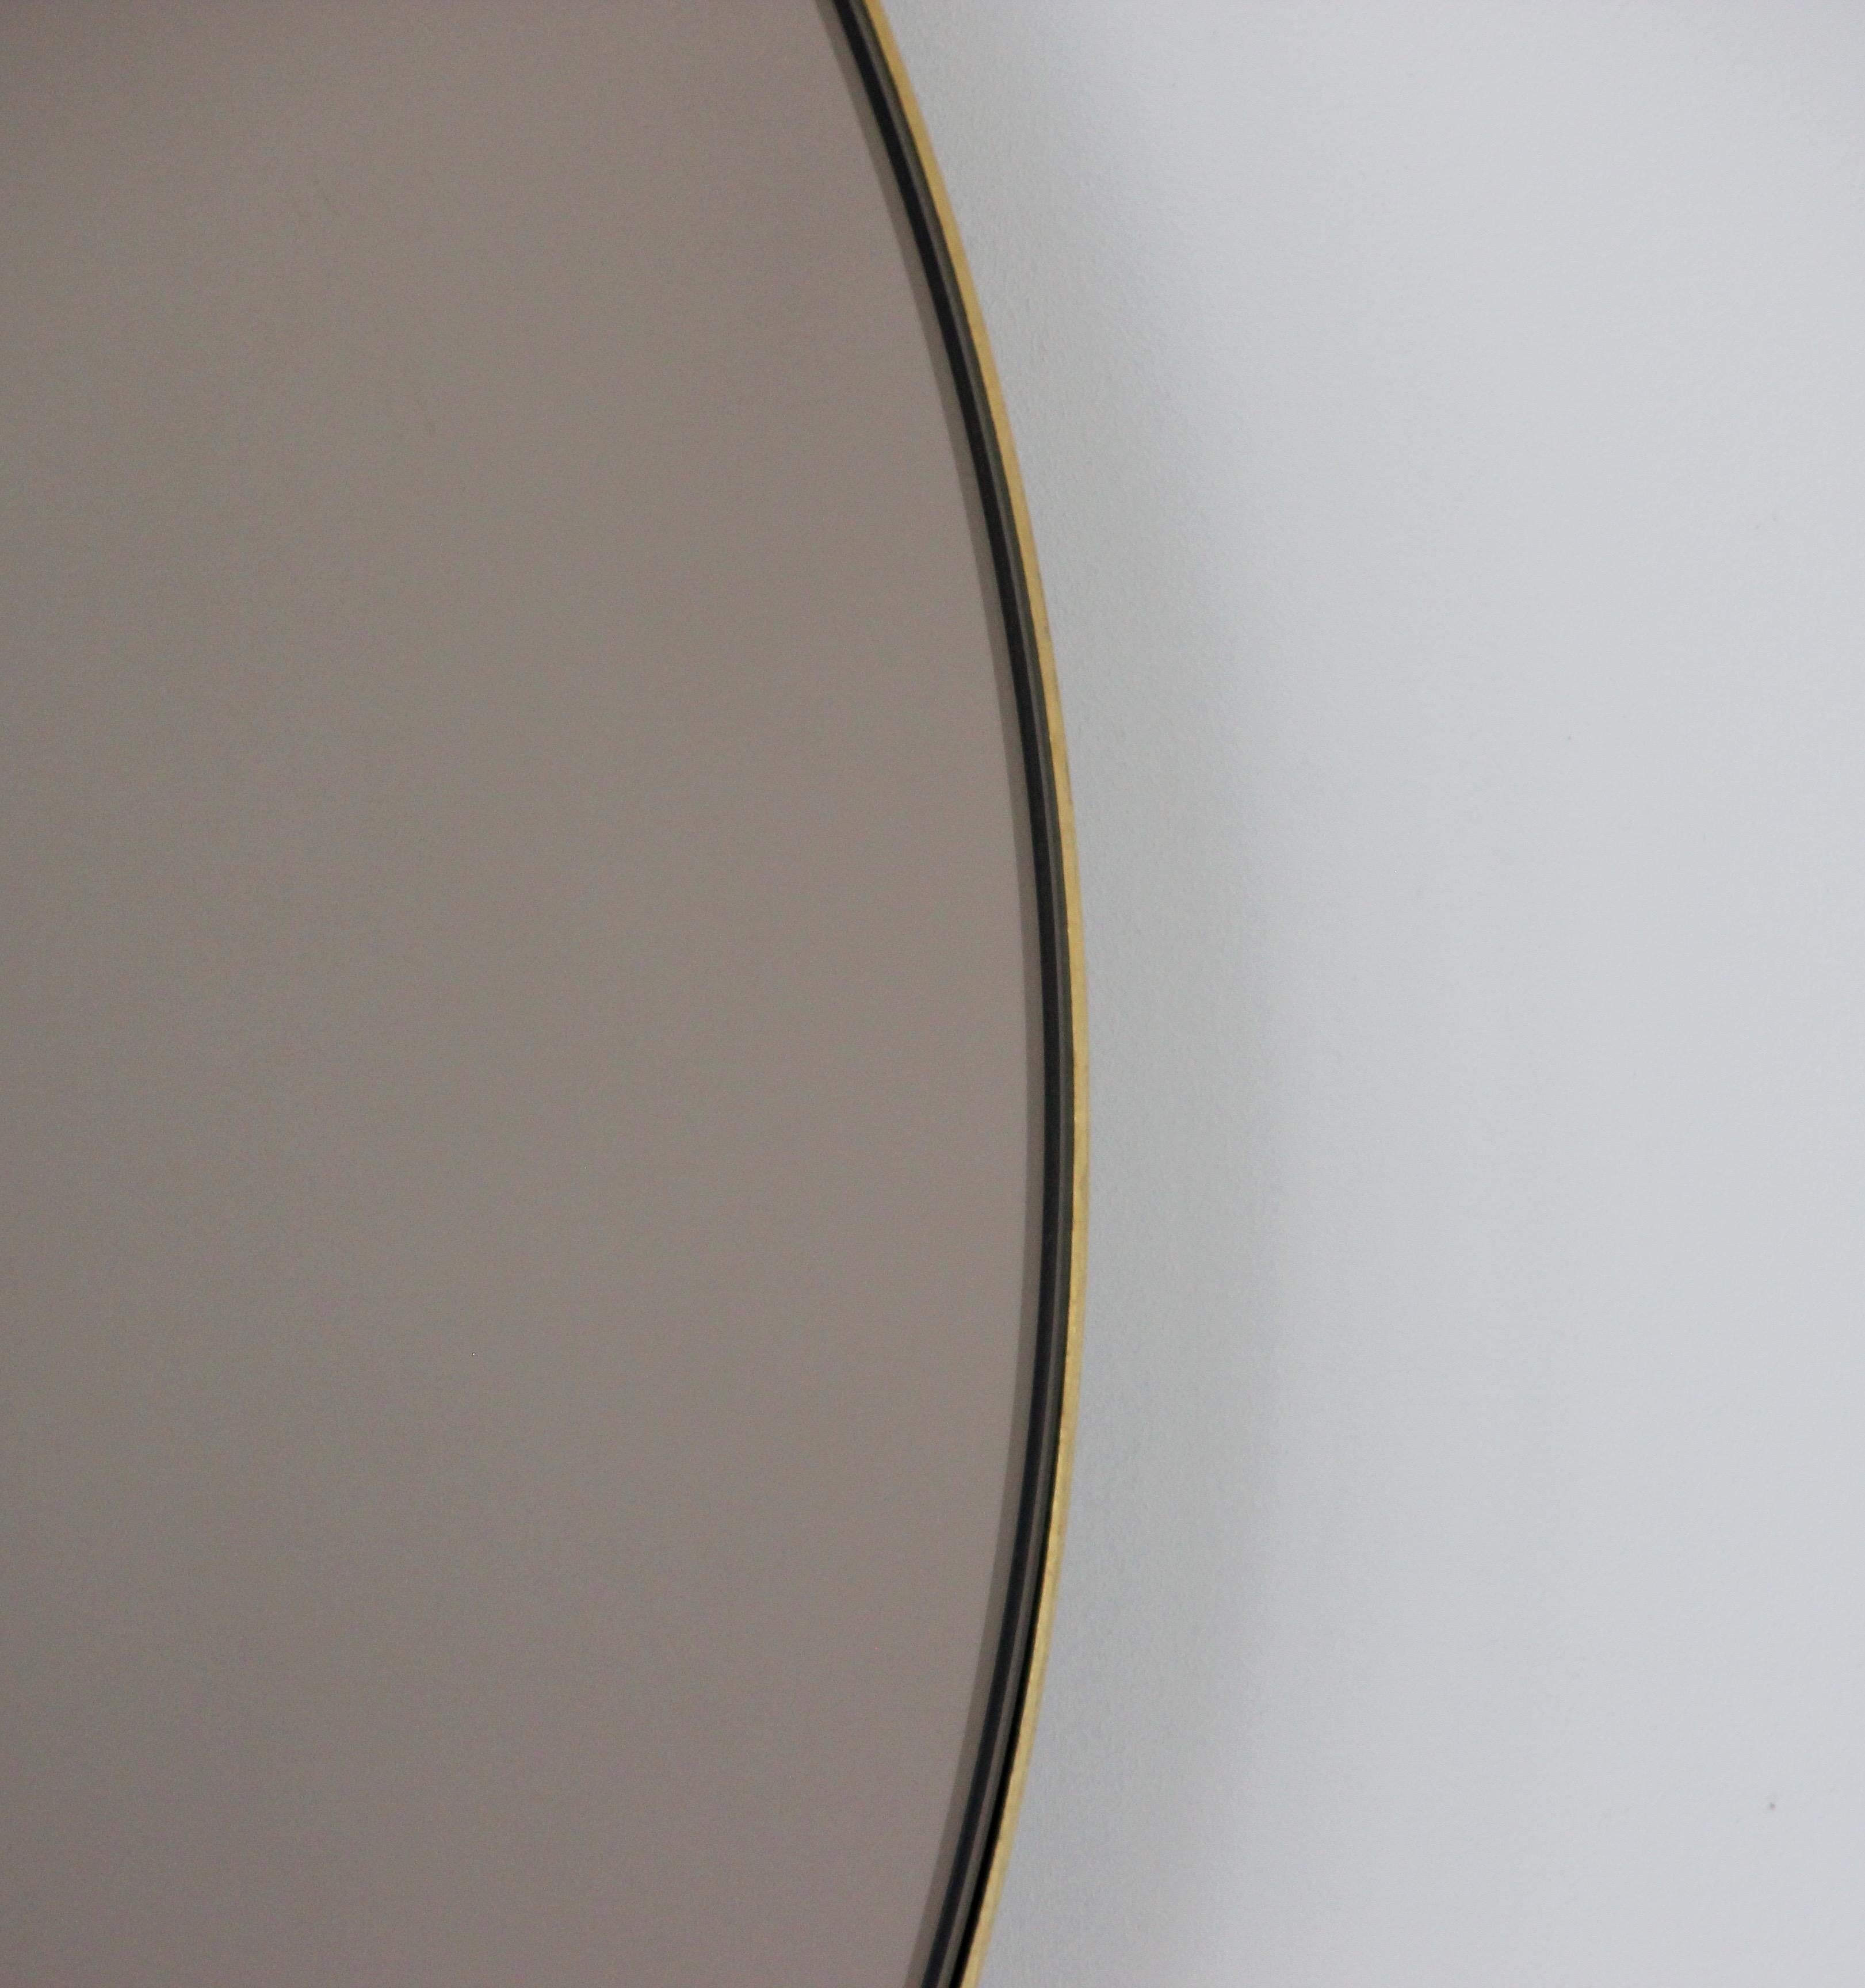 Orbis Bronze Tinted Minimalist Circular Mirror, Brass Frame, Small In New Condition For Sale In London, GB